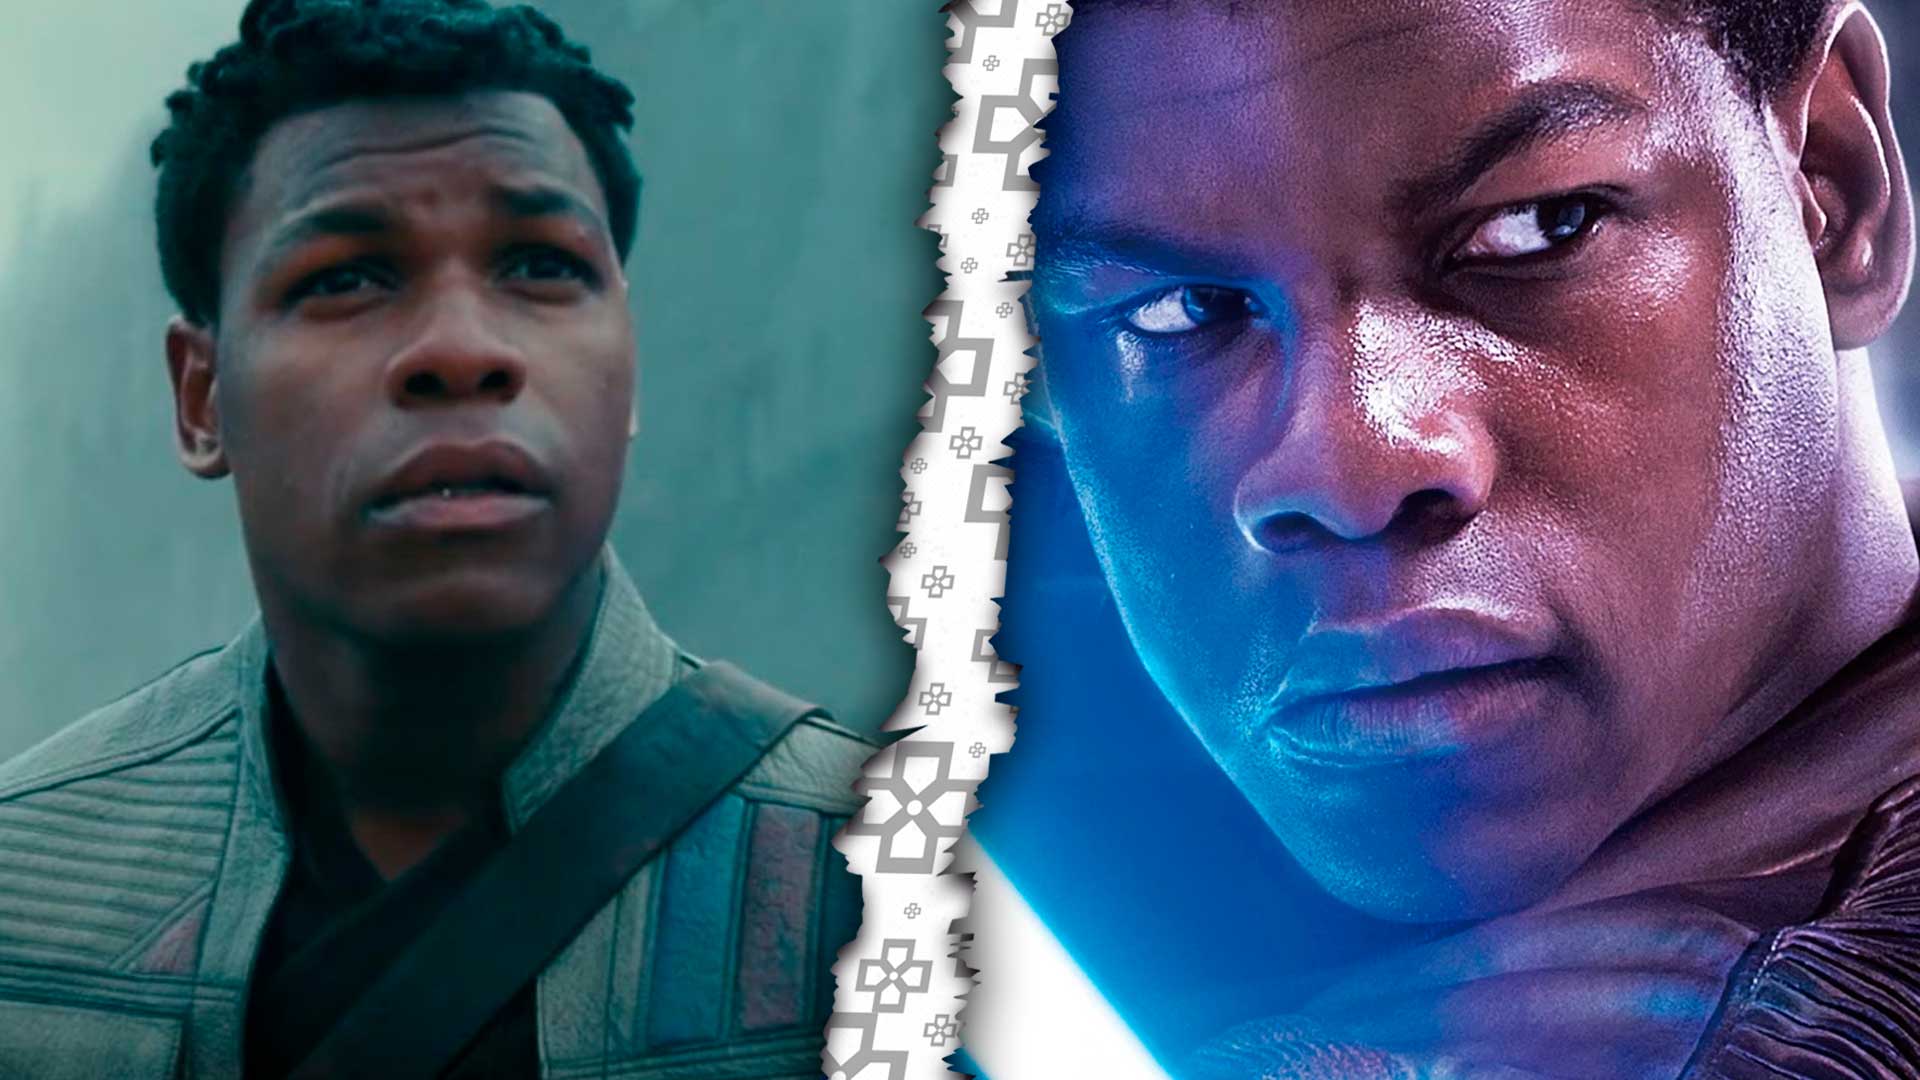 John Boyega opened up about his love for Star Wars as a fan